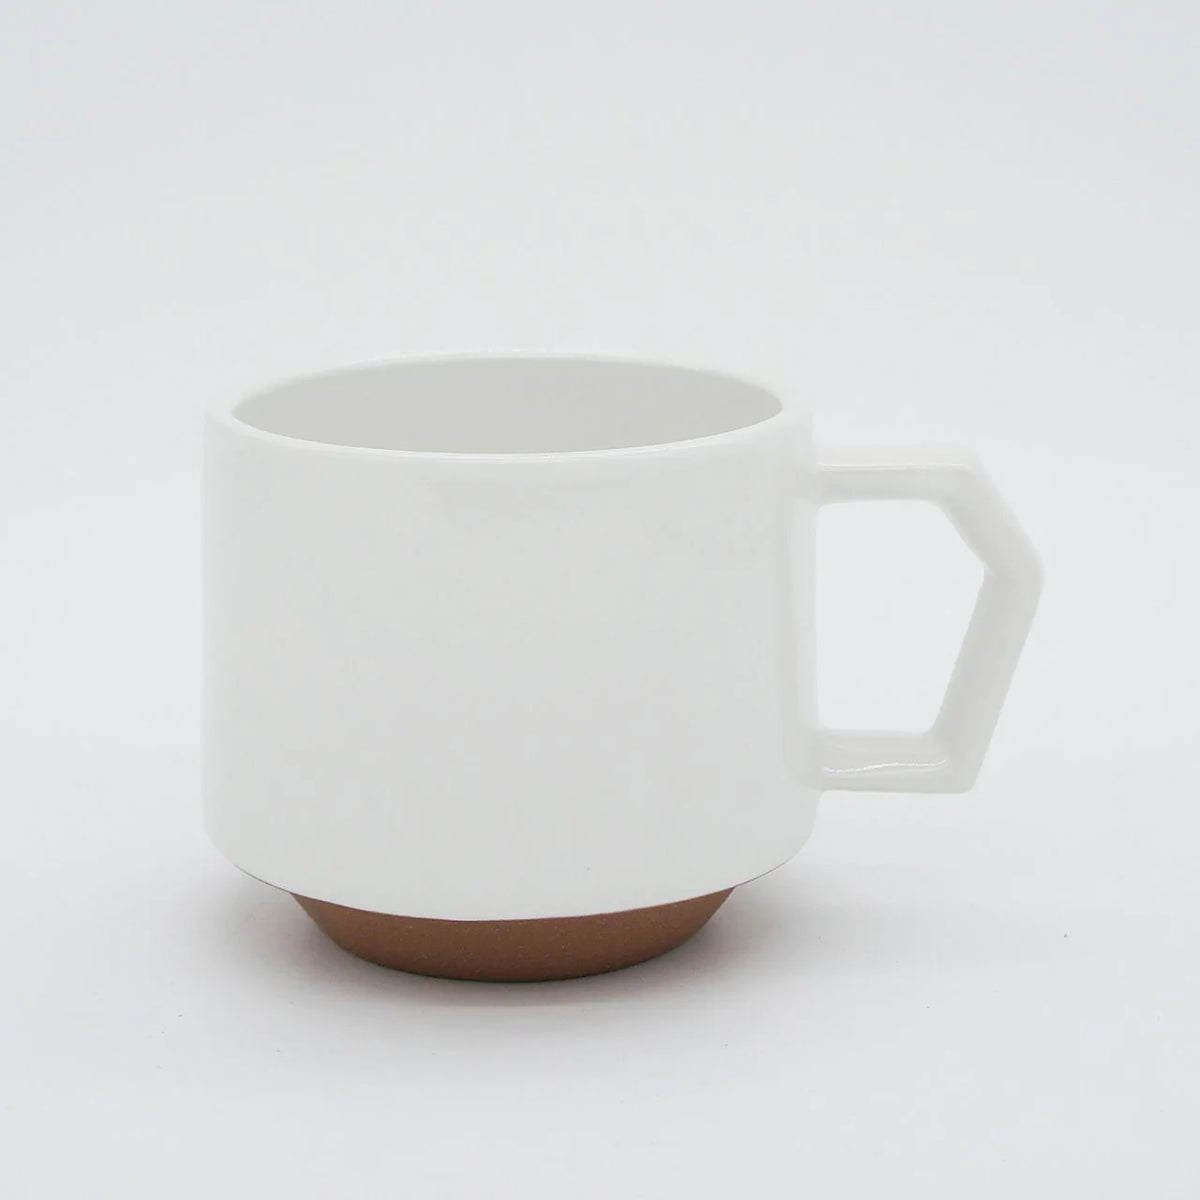 A Stacking Mug – White with a brown handle on a white background, combining functionality and aesthetic appeal. - CHIPS Inc.